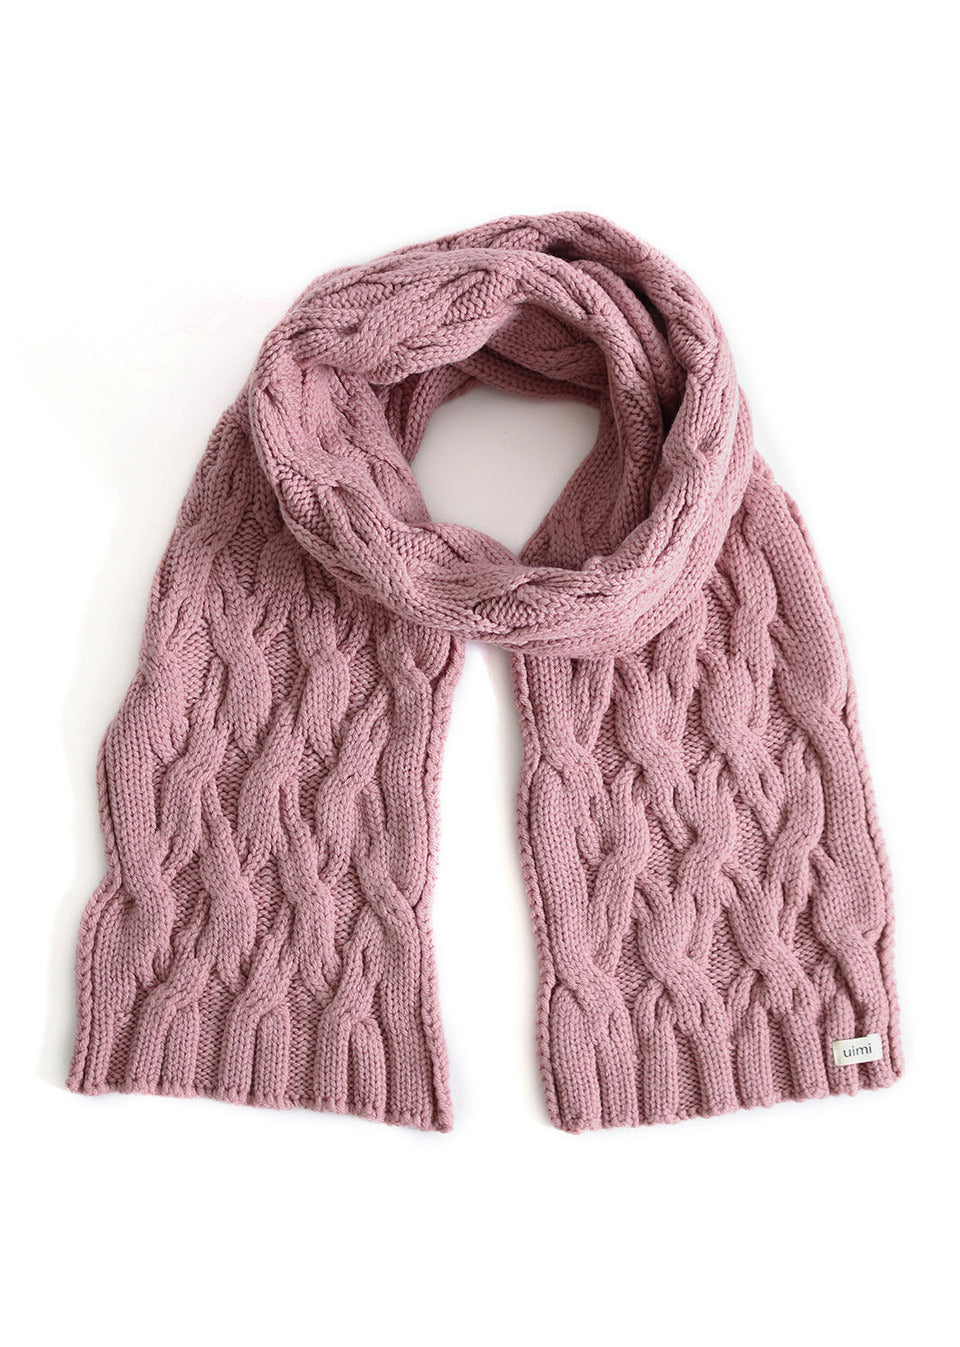 Uimi Scarf - Mabel